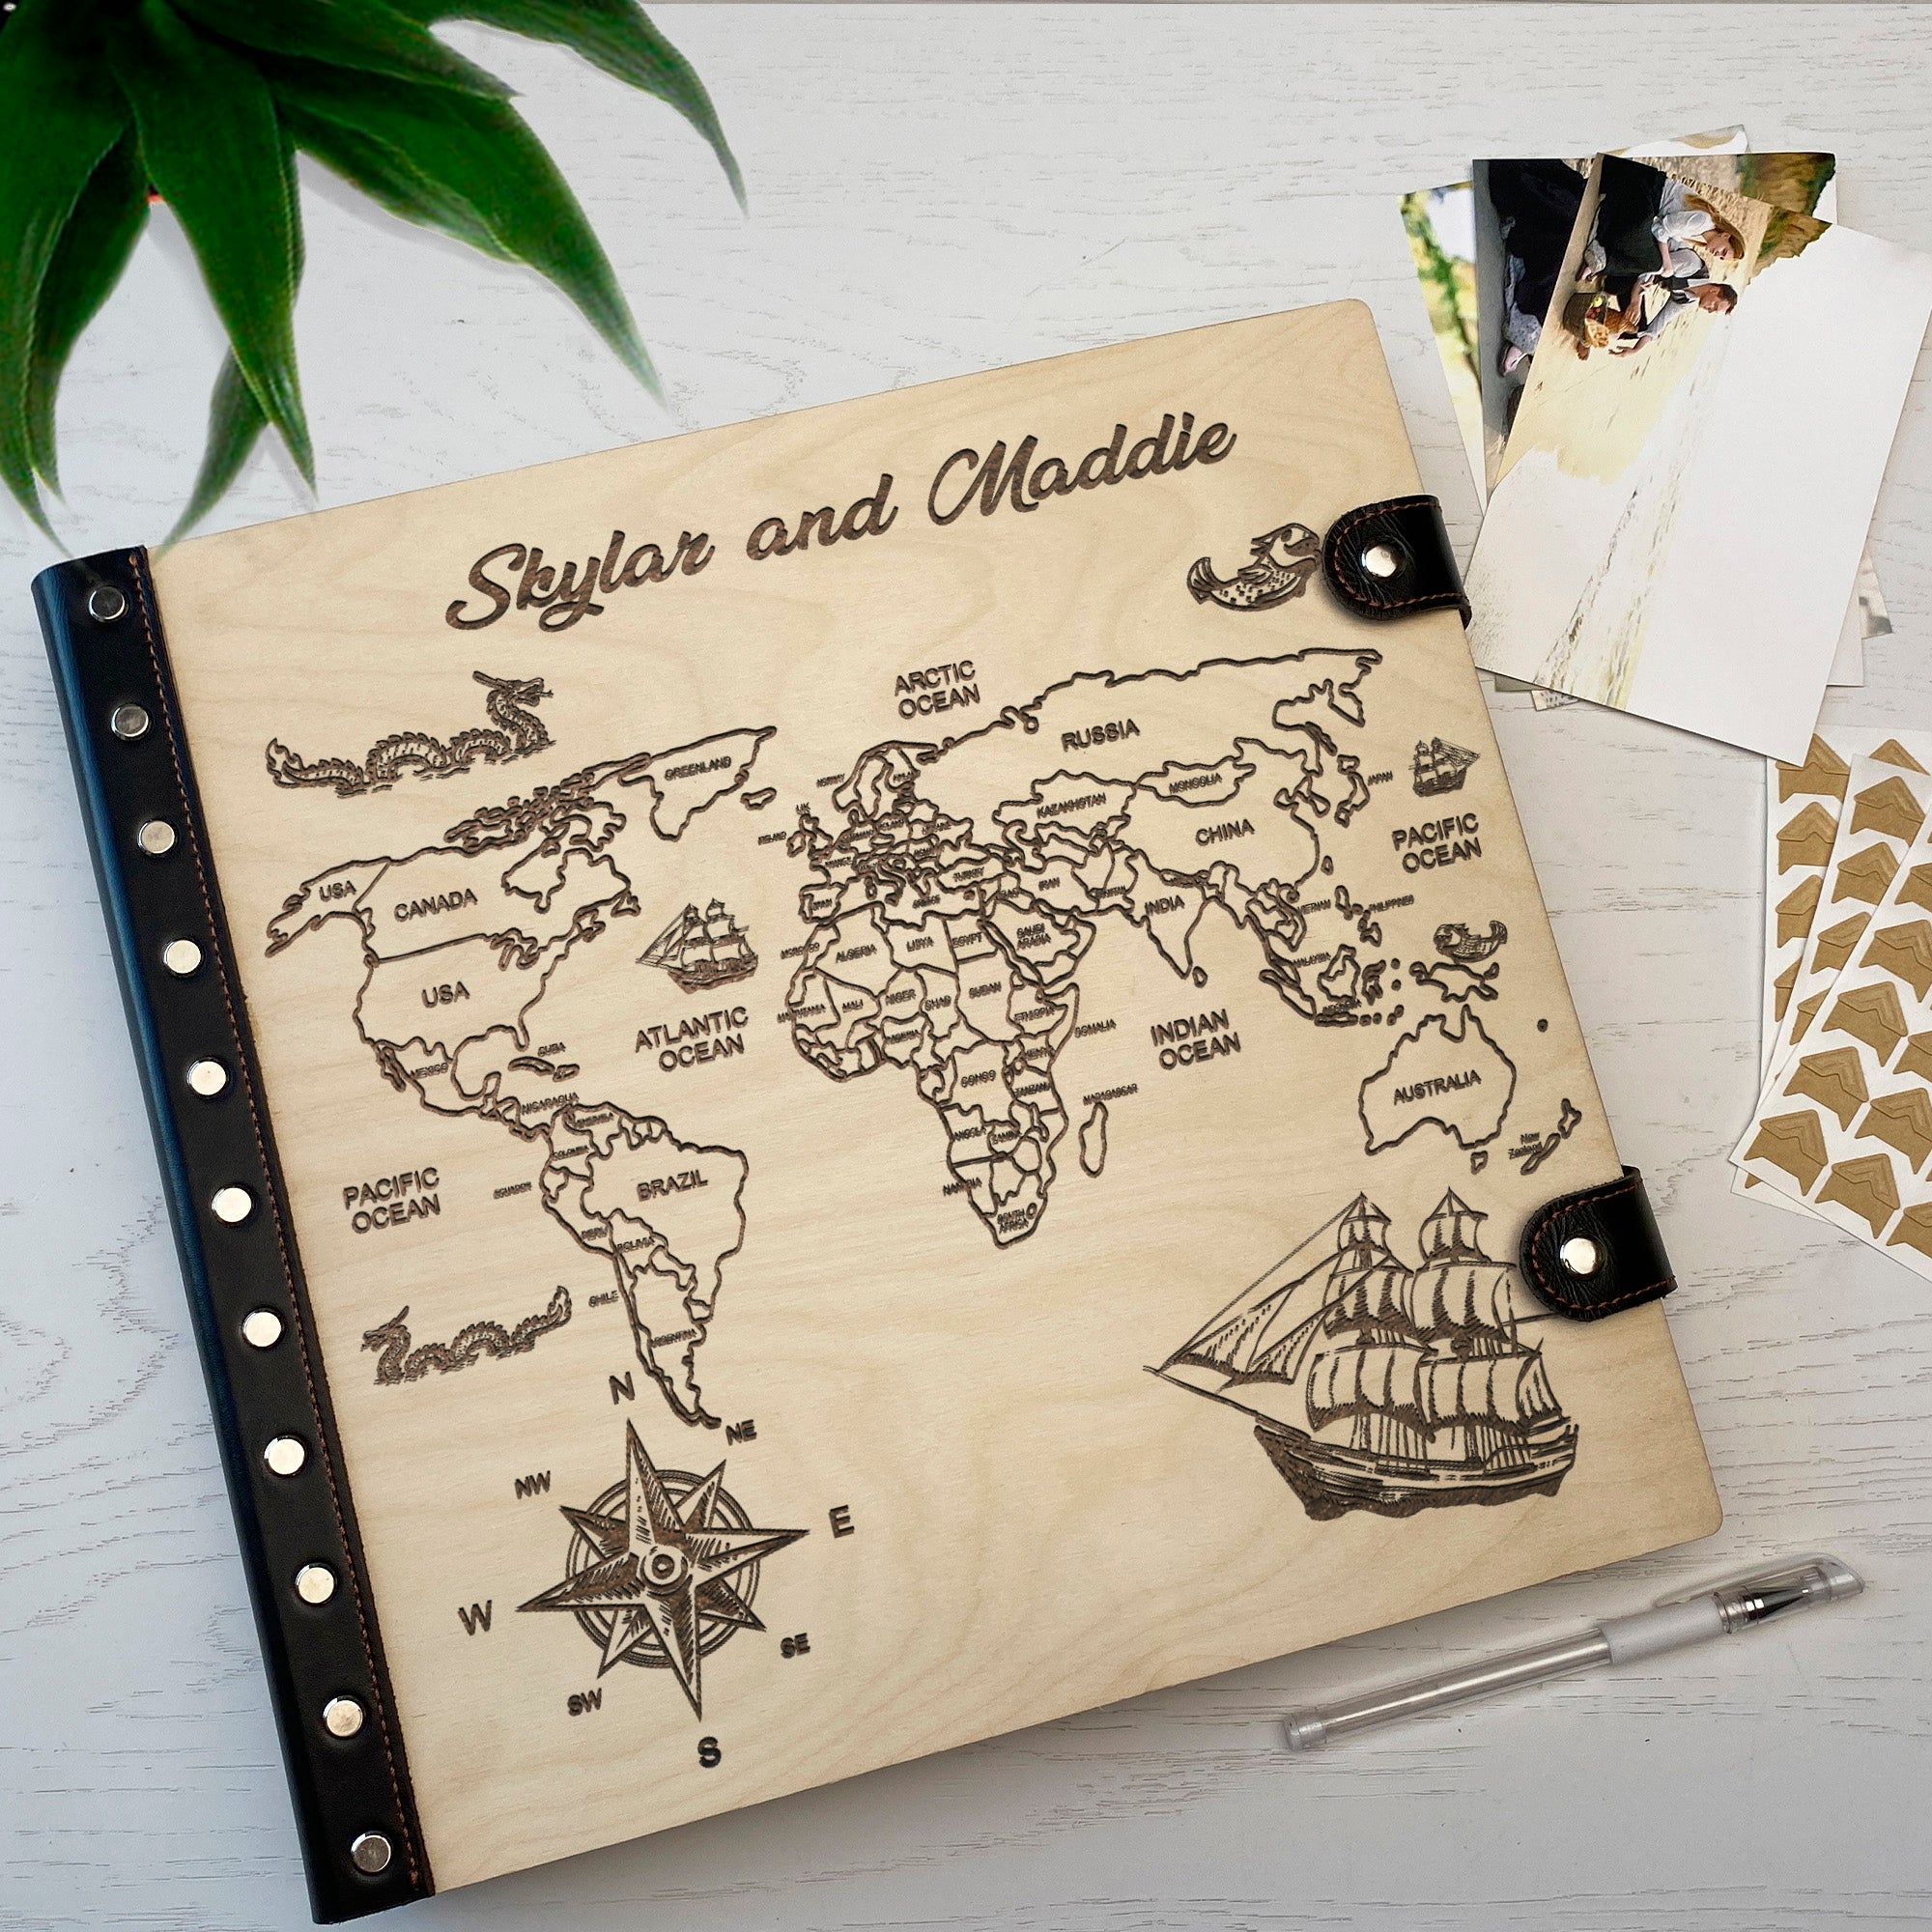 Personalized photo album with leather cover and World Map engraving